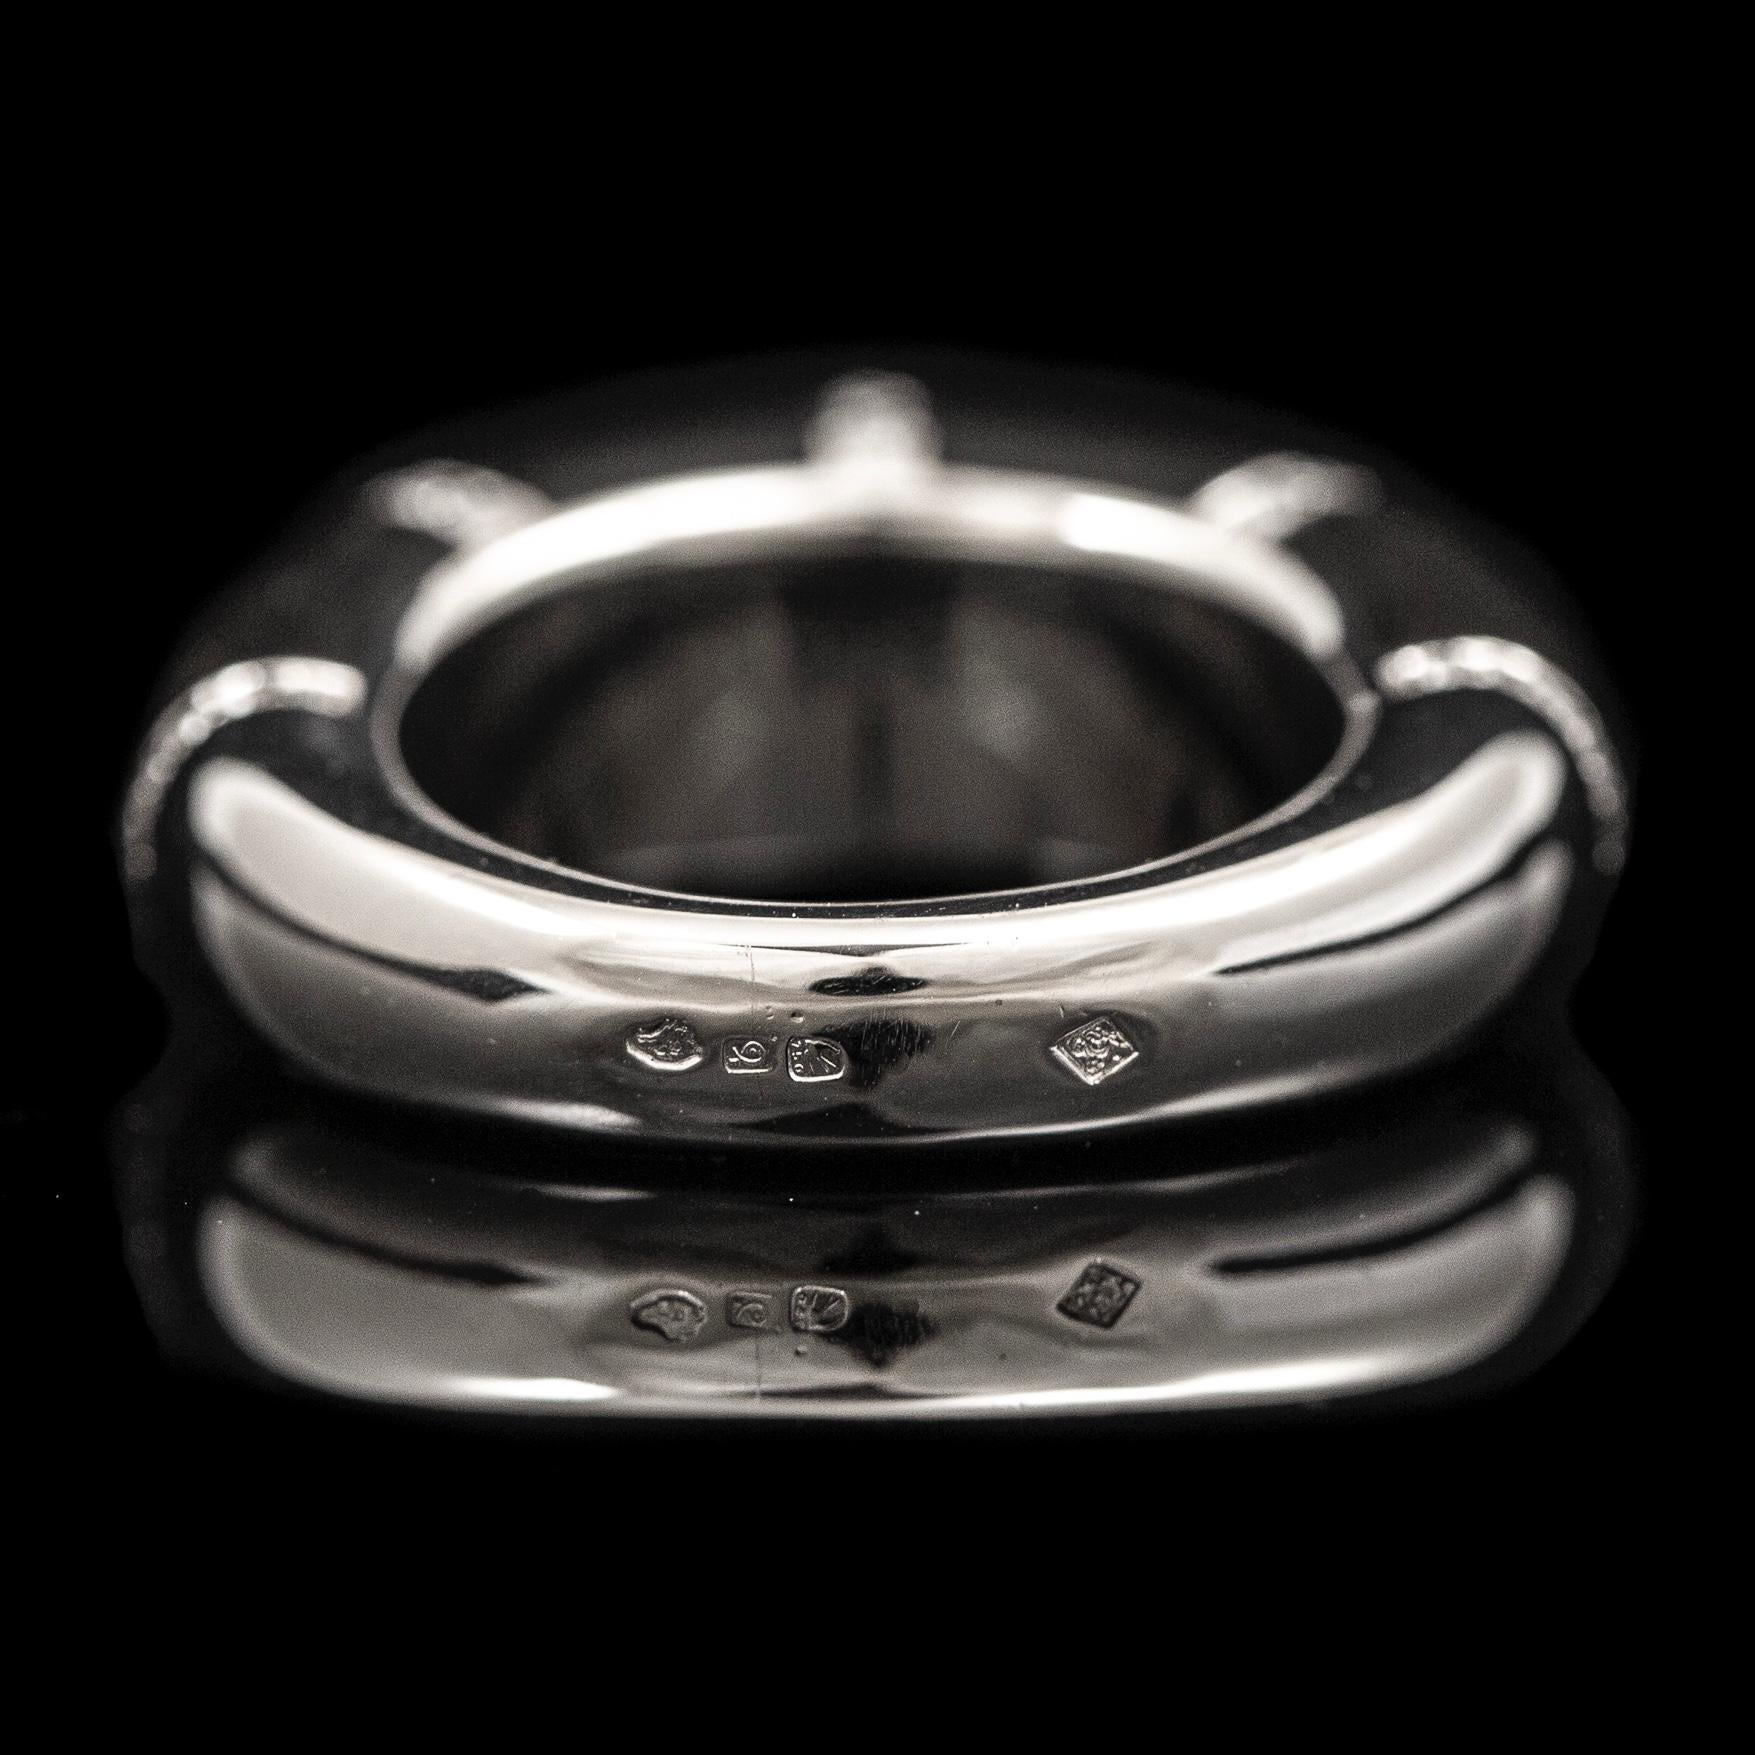 Chaumet Anneau Diamond Black Ebony Cocktail Ring 18k White Gold French 1990s For Sale 1